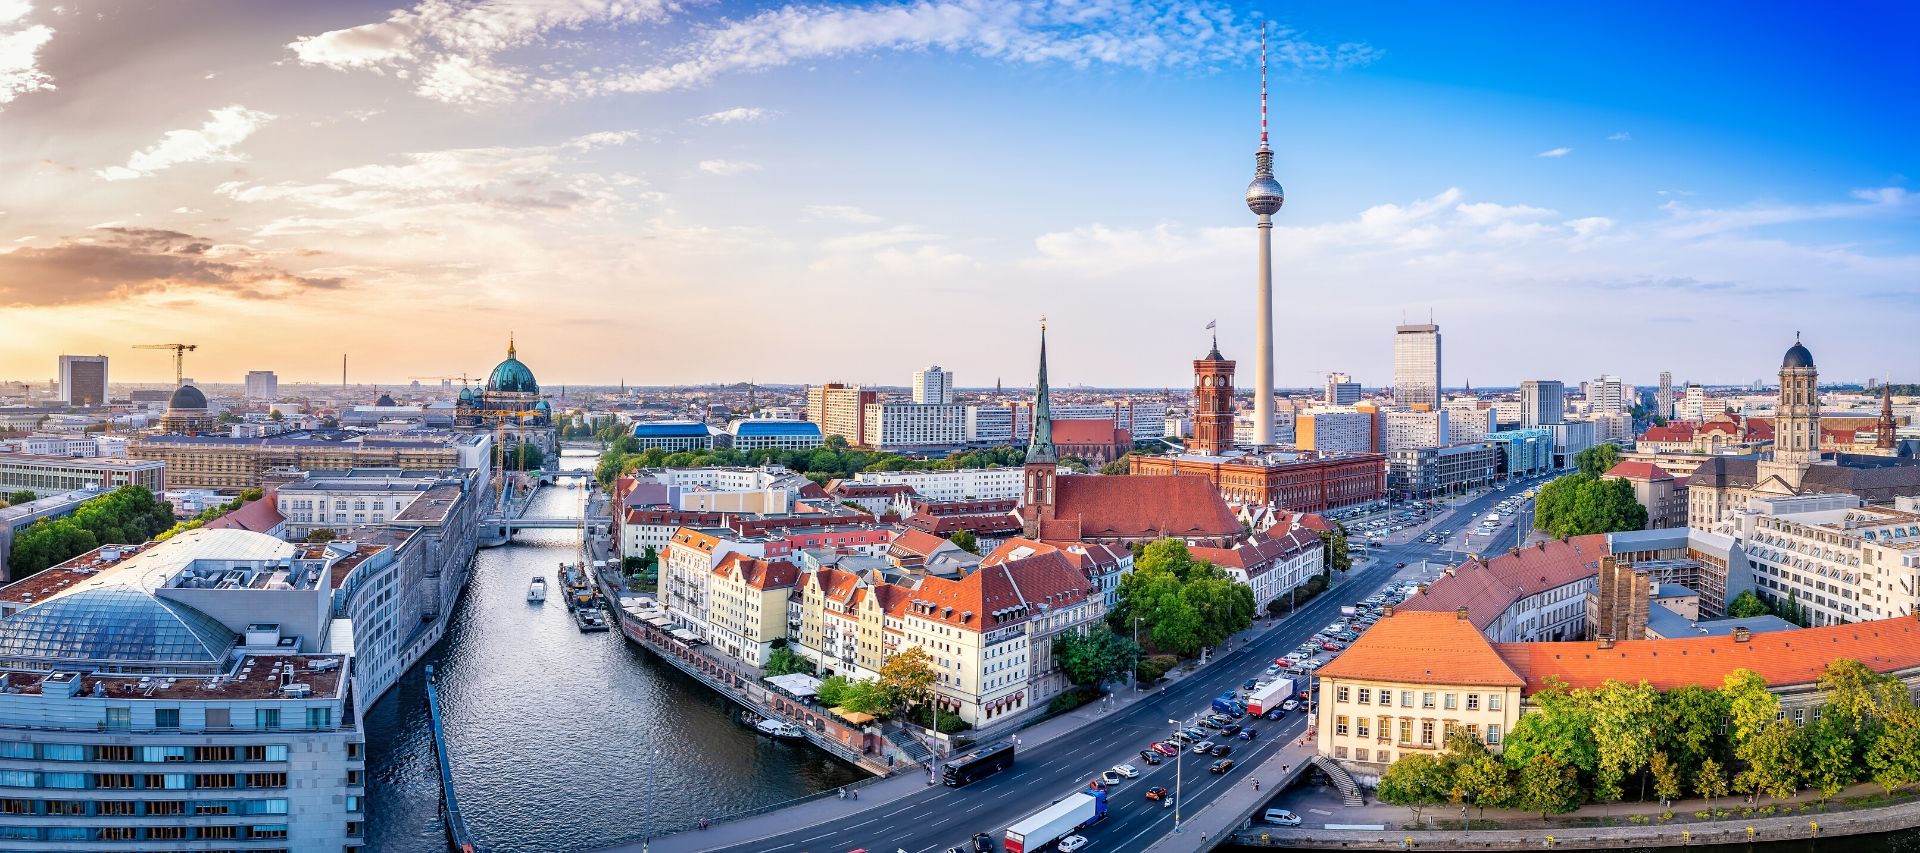 How to Spend the Perfect Weekend in Berlin